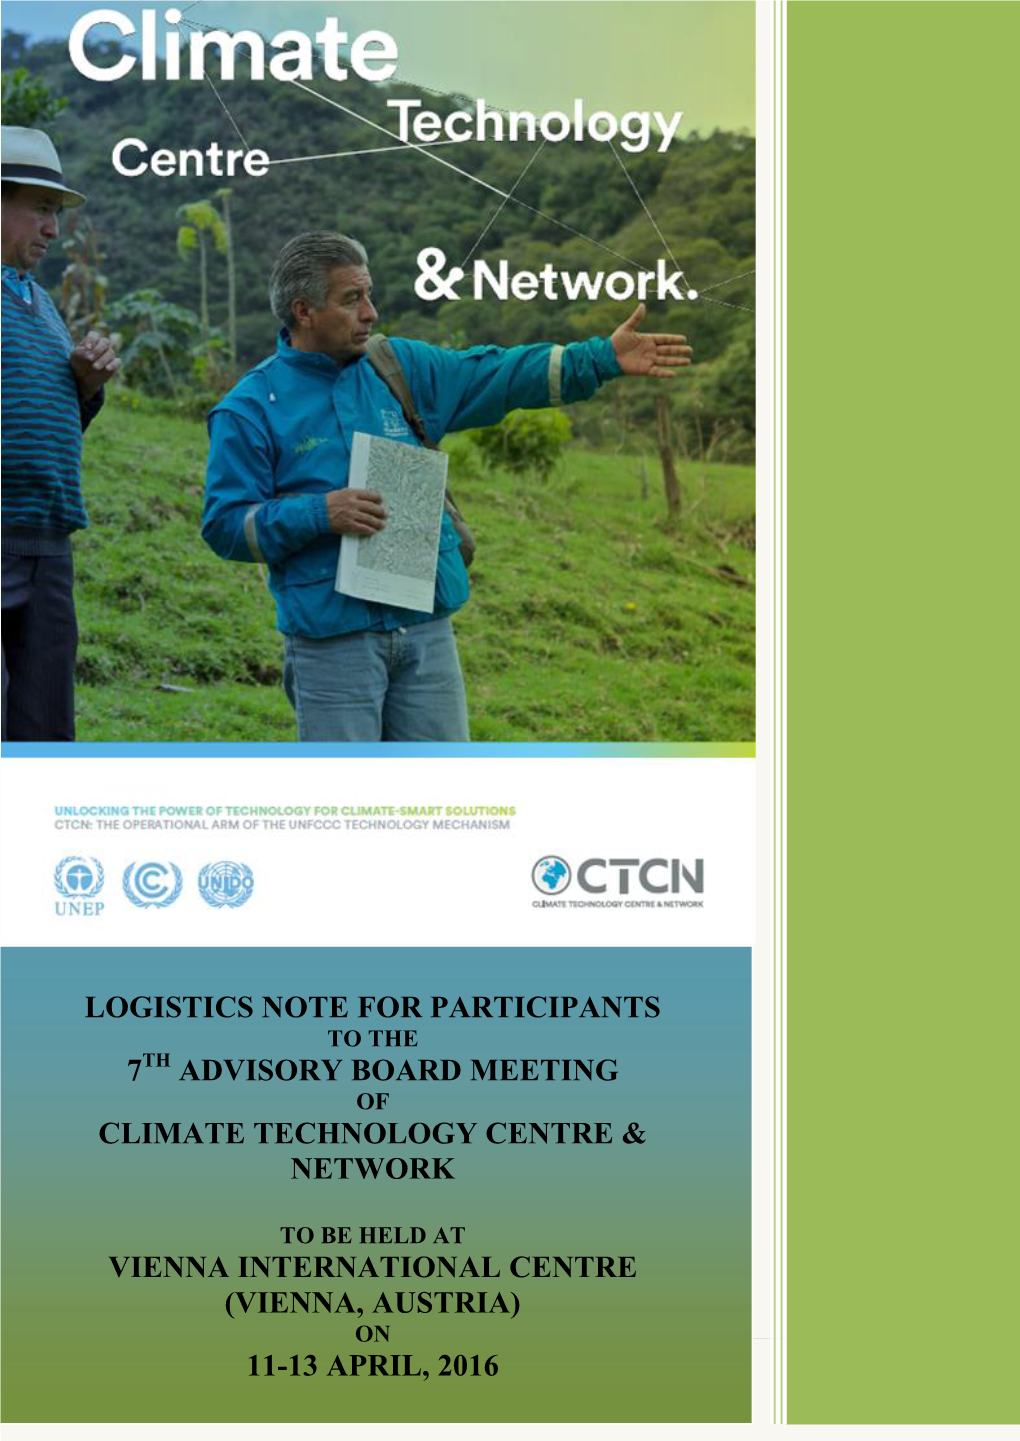 Logistics Note for Participants to the 7Th Advisory Board Meeting of Climate Technology Centre & Network